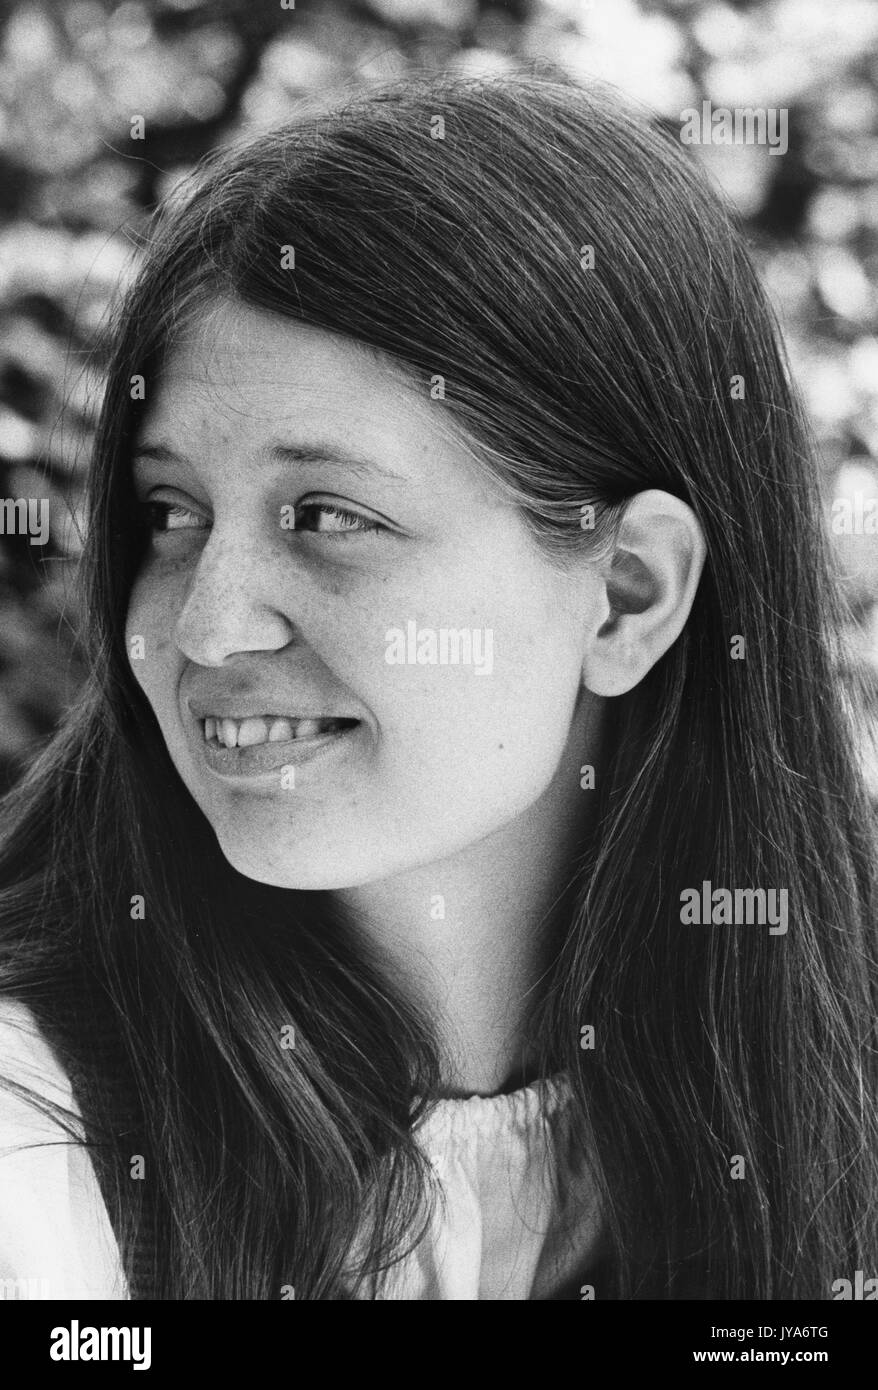 A portrait photograph of a female undergraduate student at Johns Hopkins University sitting outside on campus during the first years of the undergraduate program's admittance of women, in Baltimore, Maryland. 1970. Stock Photo